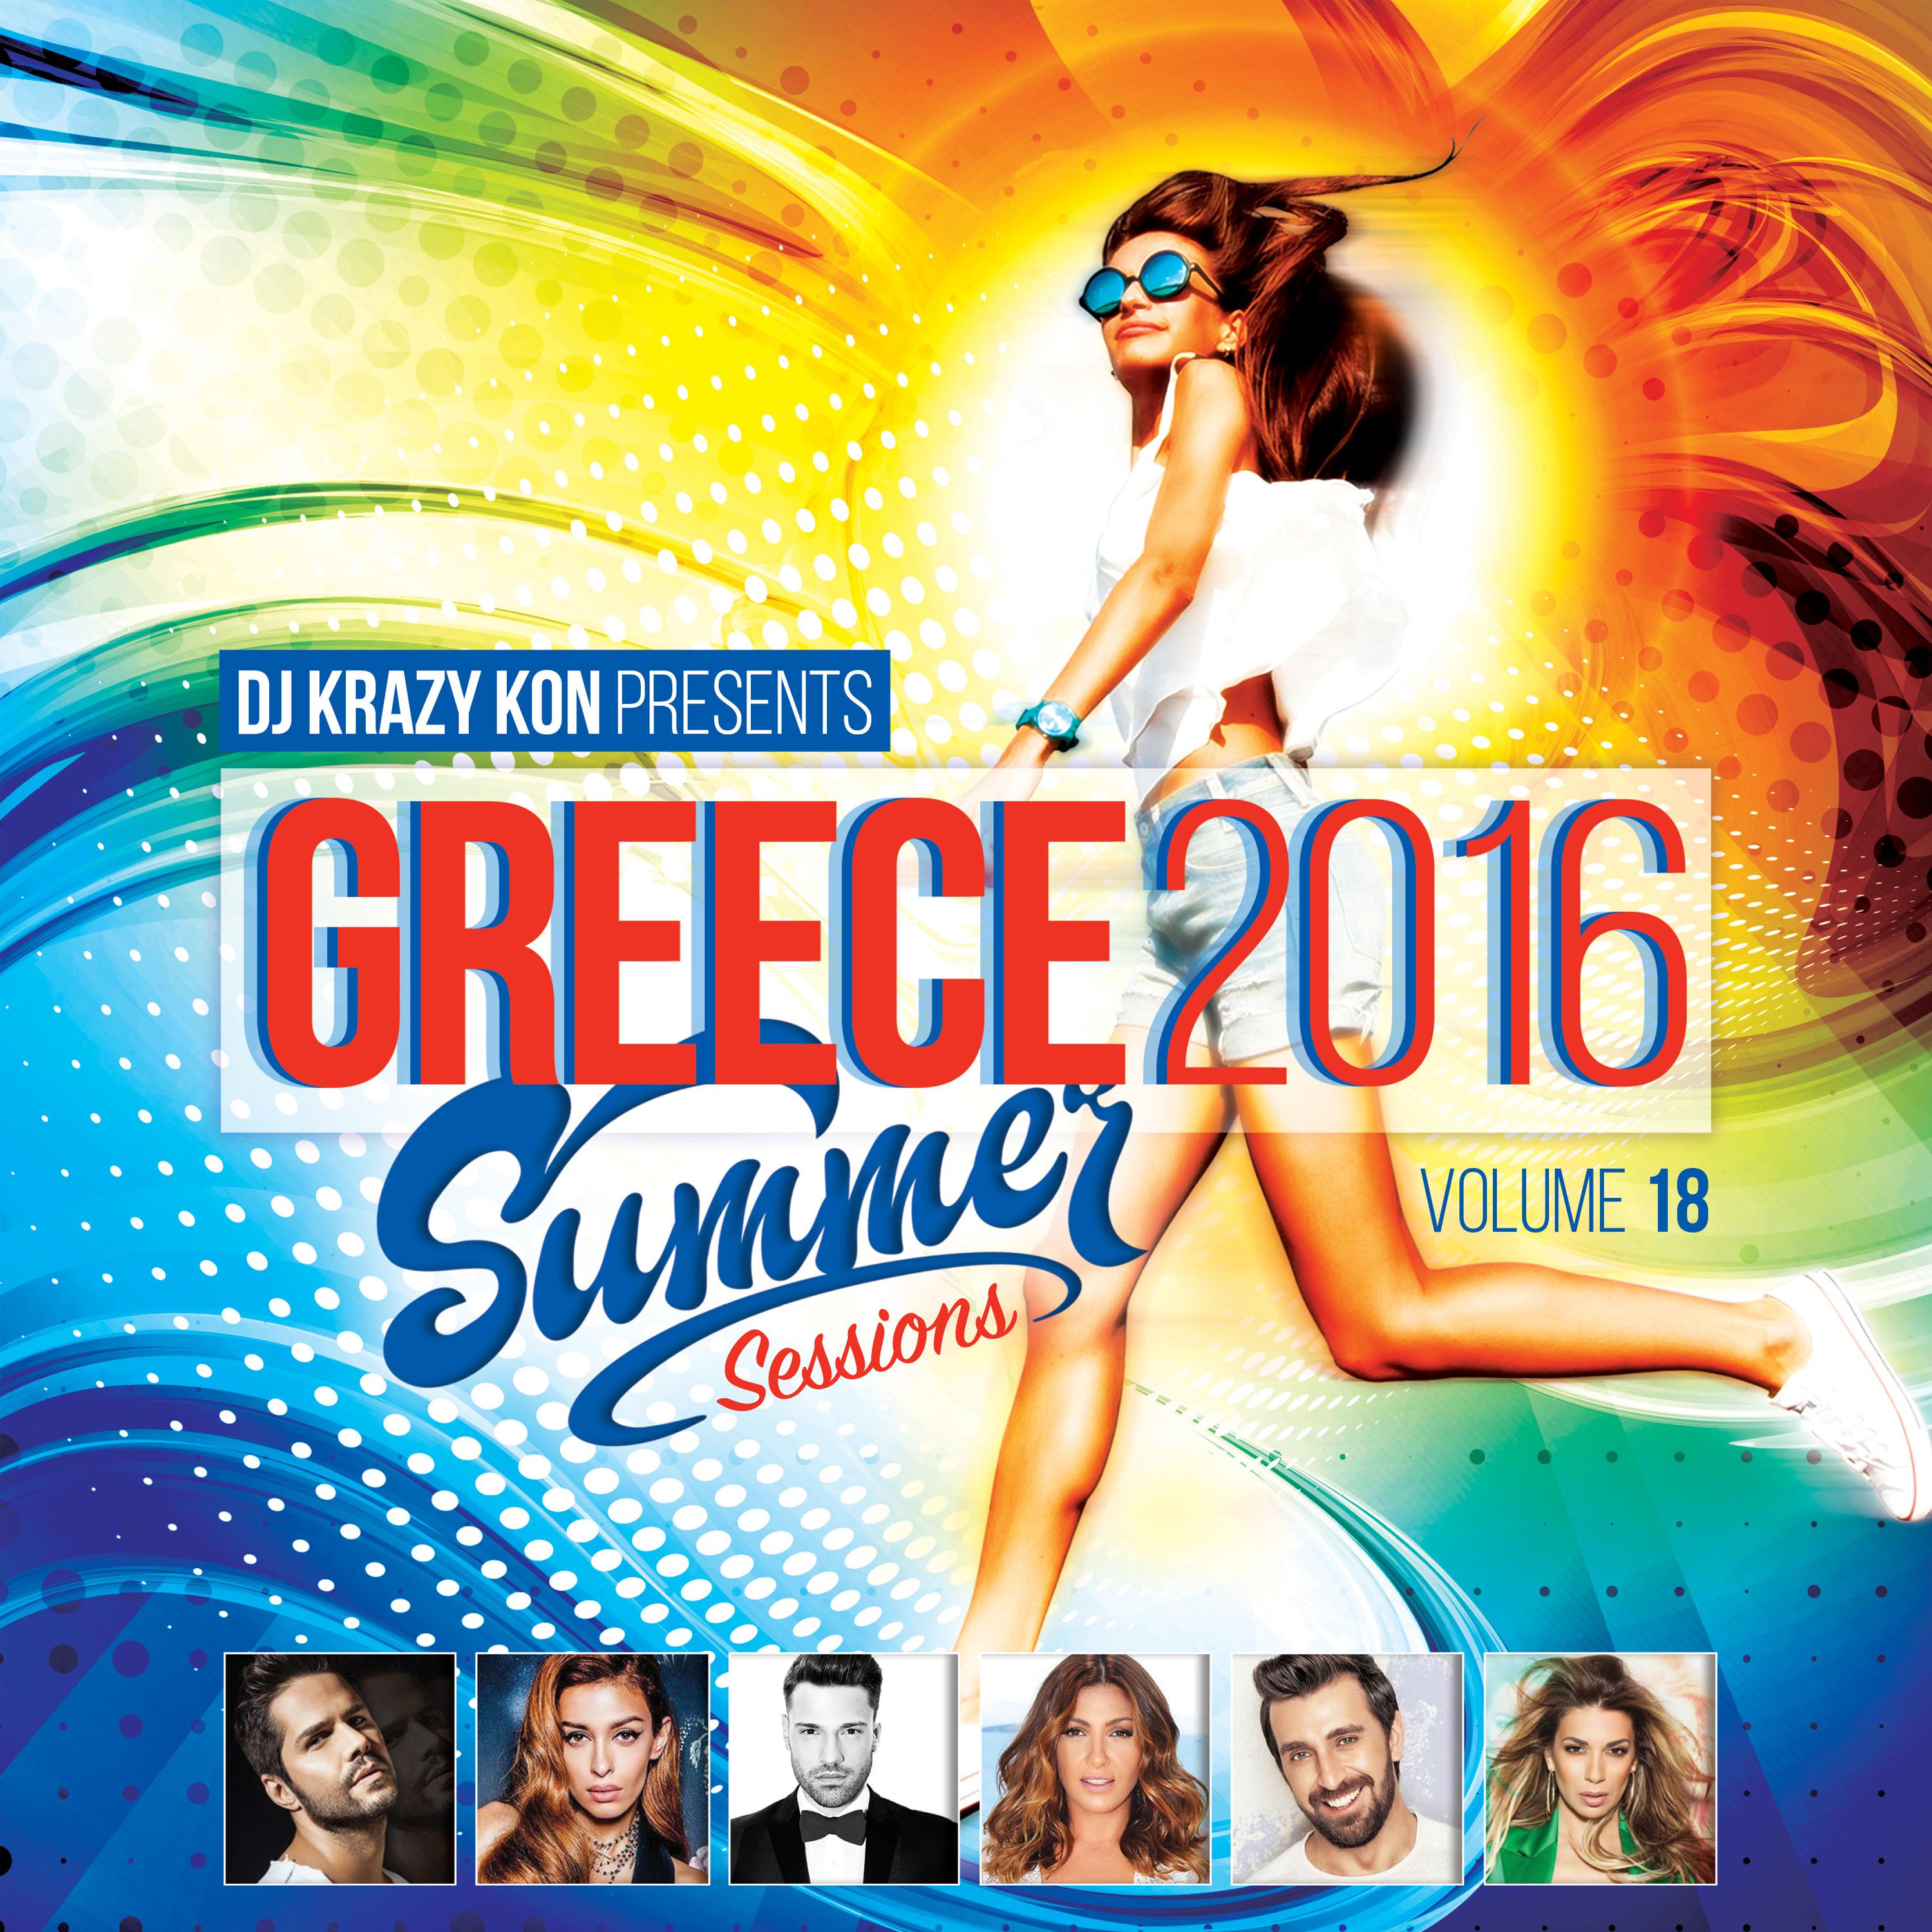 Greece 2016 Summer Sessions, Vol. 18 (Continuous Mix)